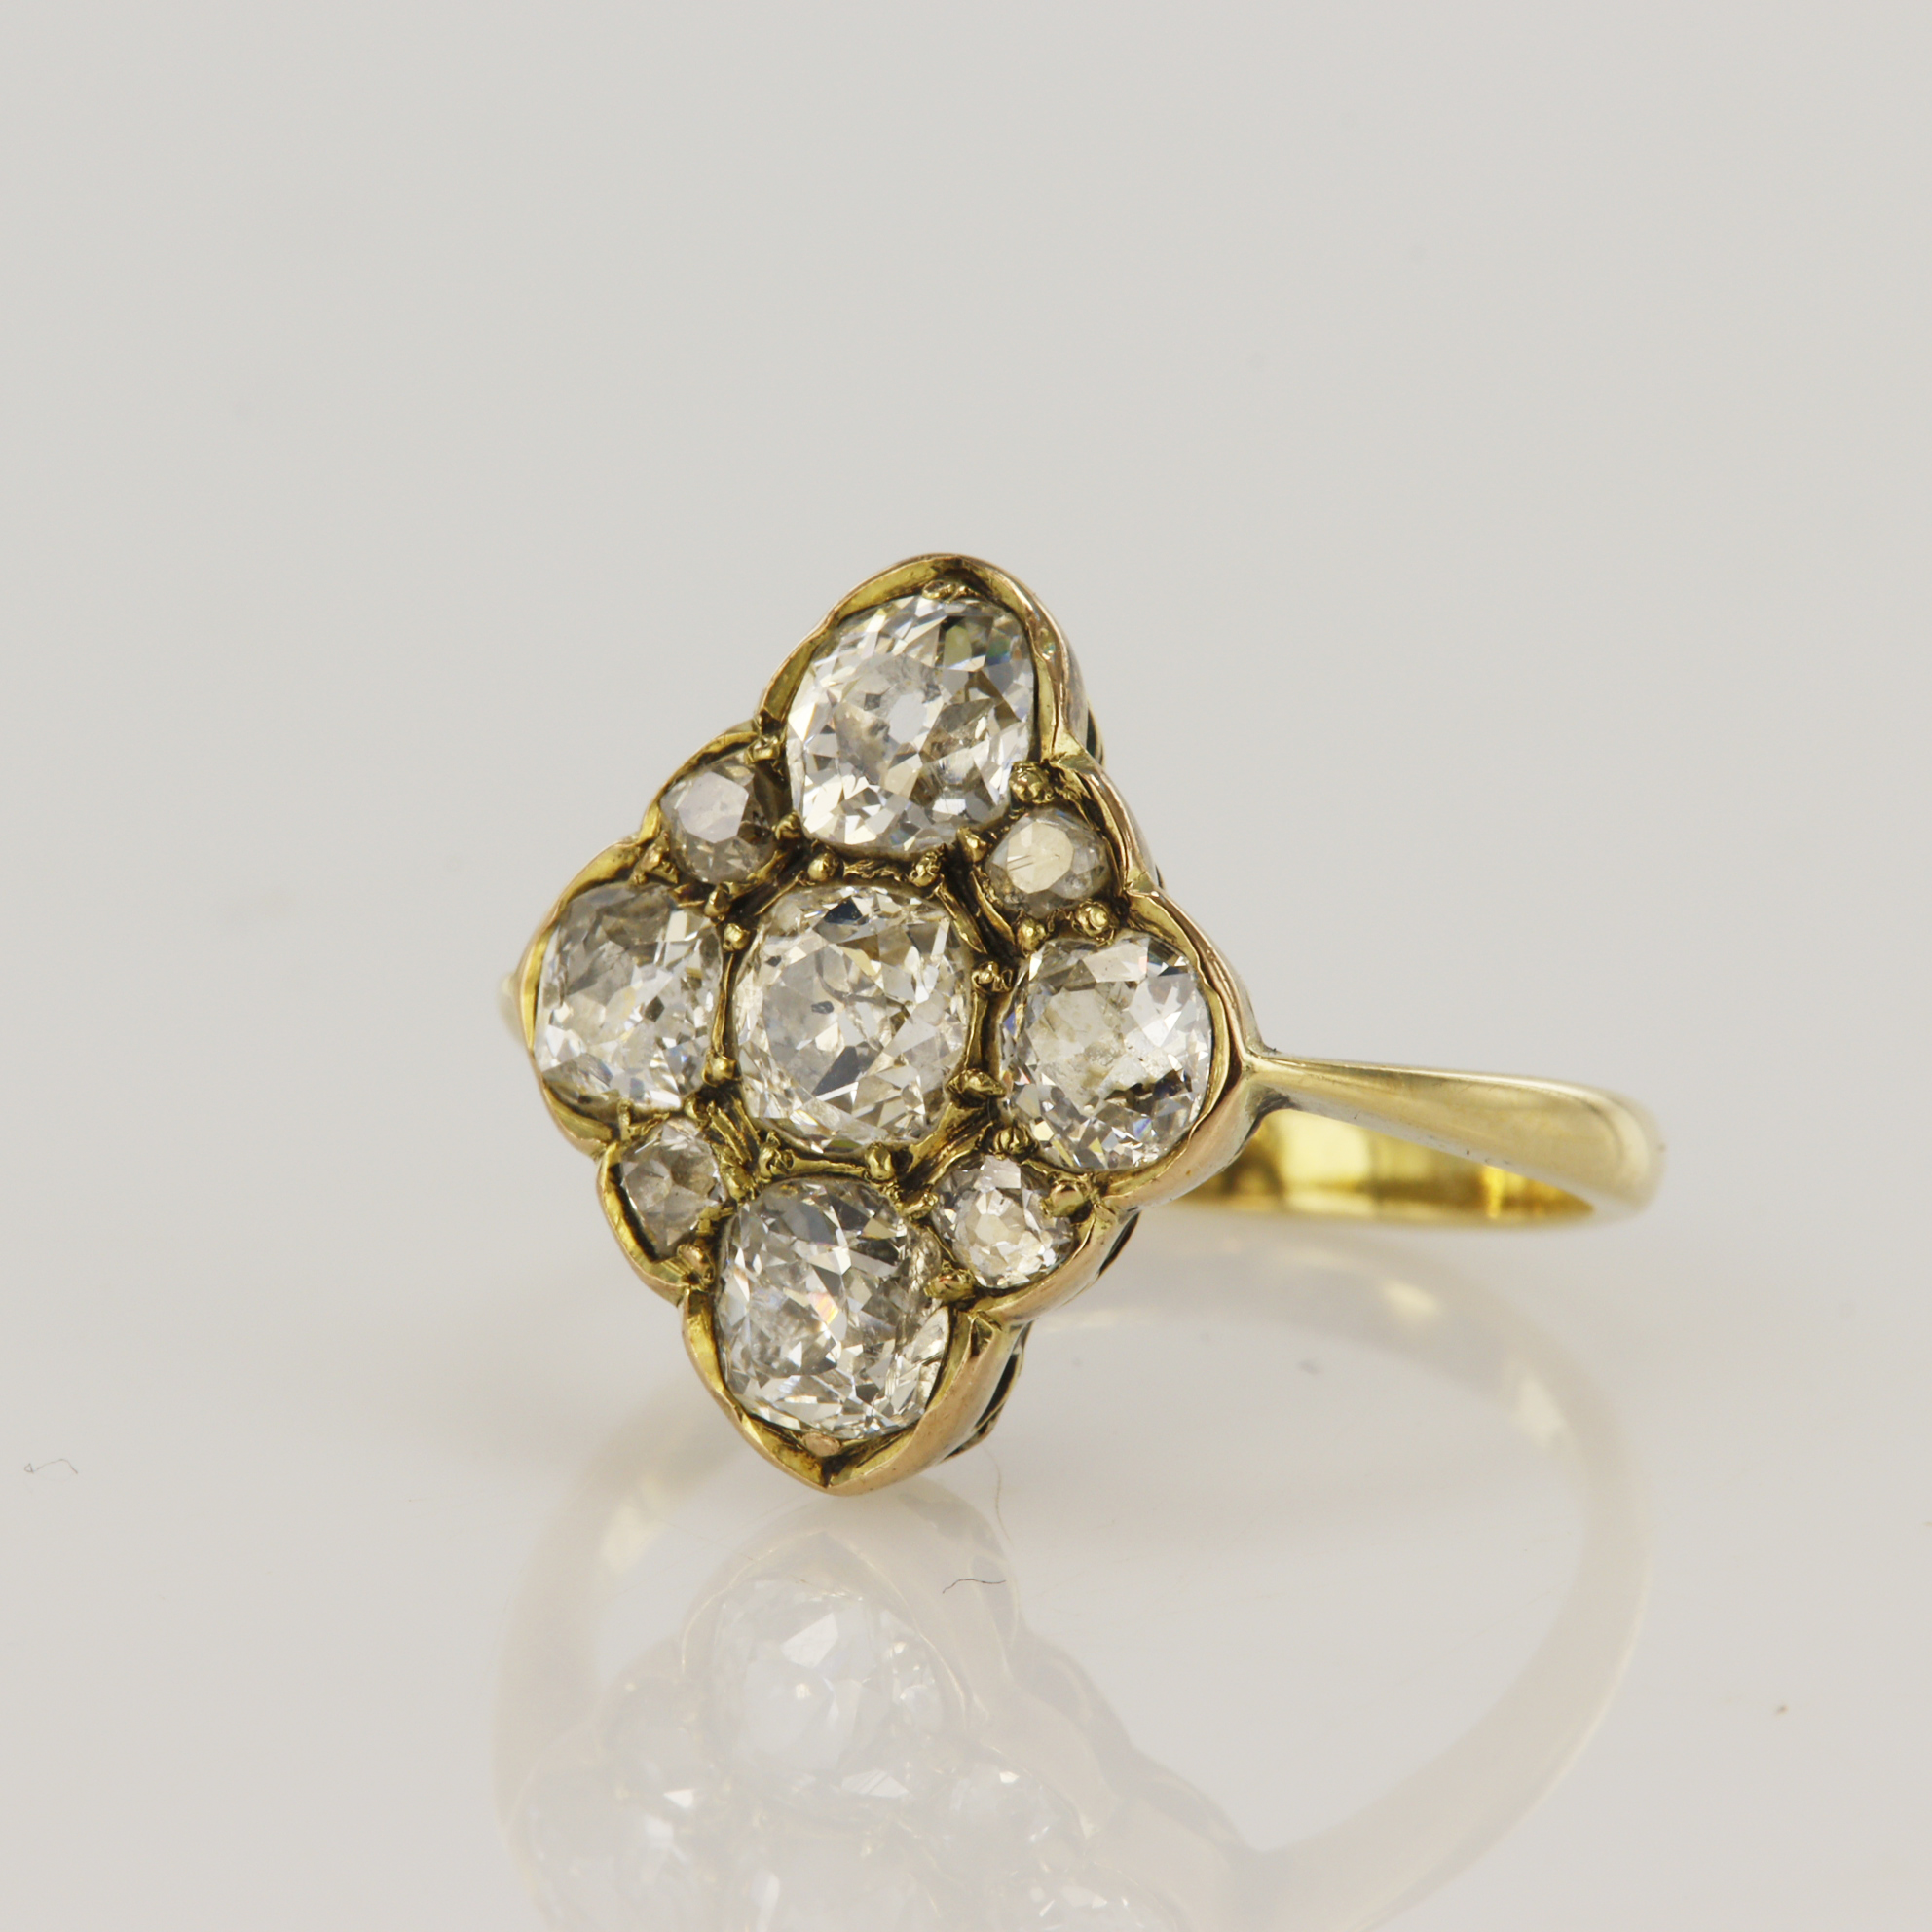 Yellow gold (tests 18ct) antique diamond lozenge shaped cluster ring, nine old mine cuts, TDW